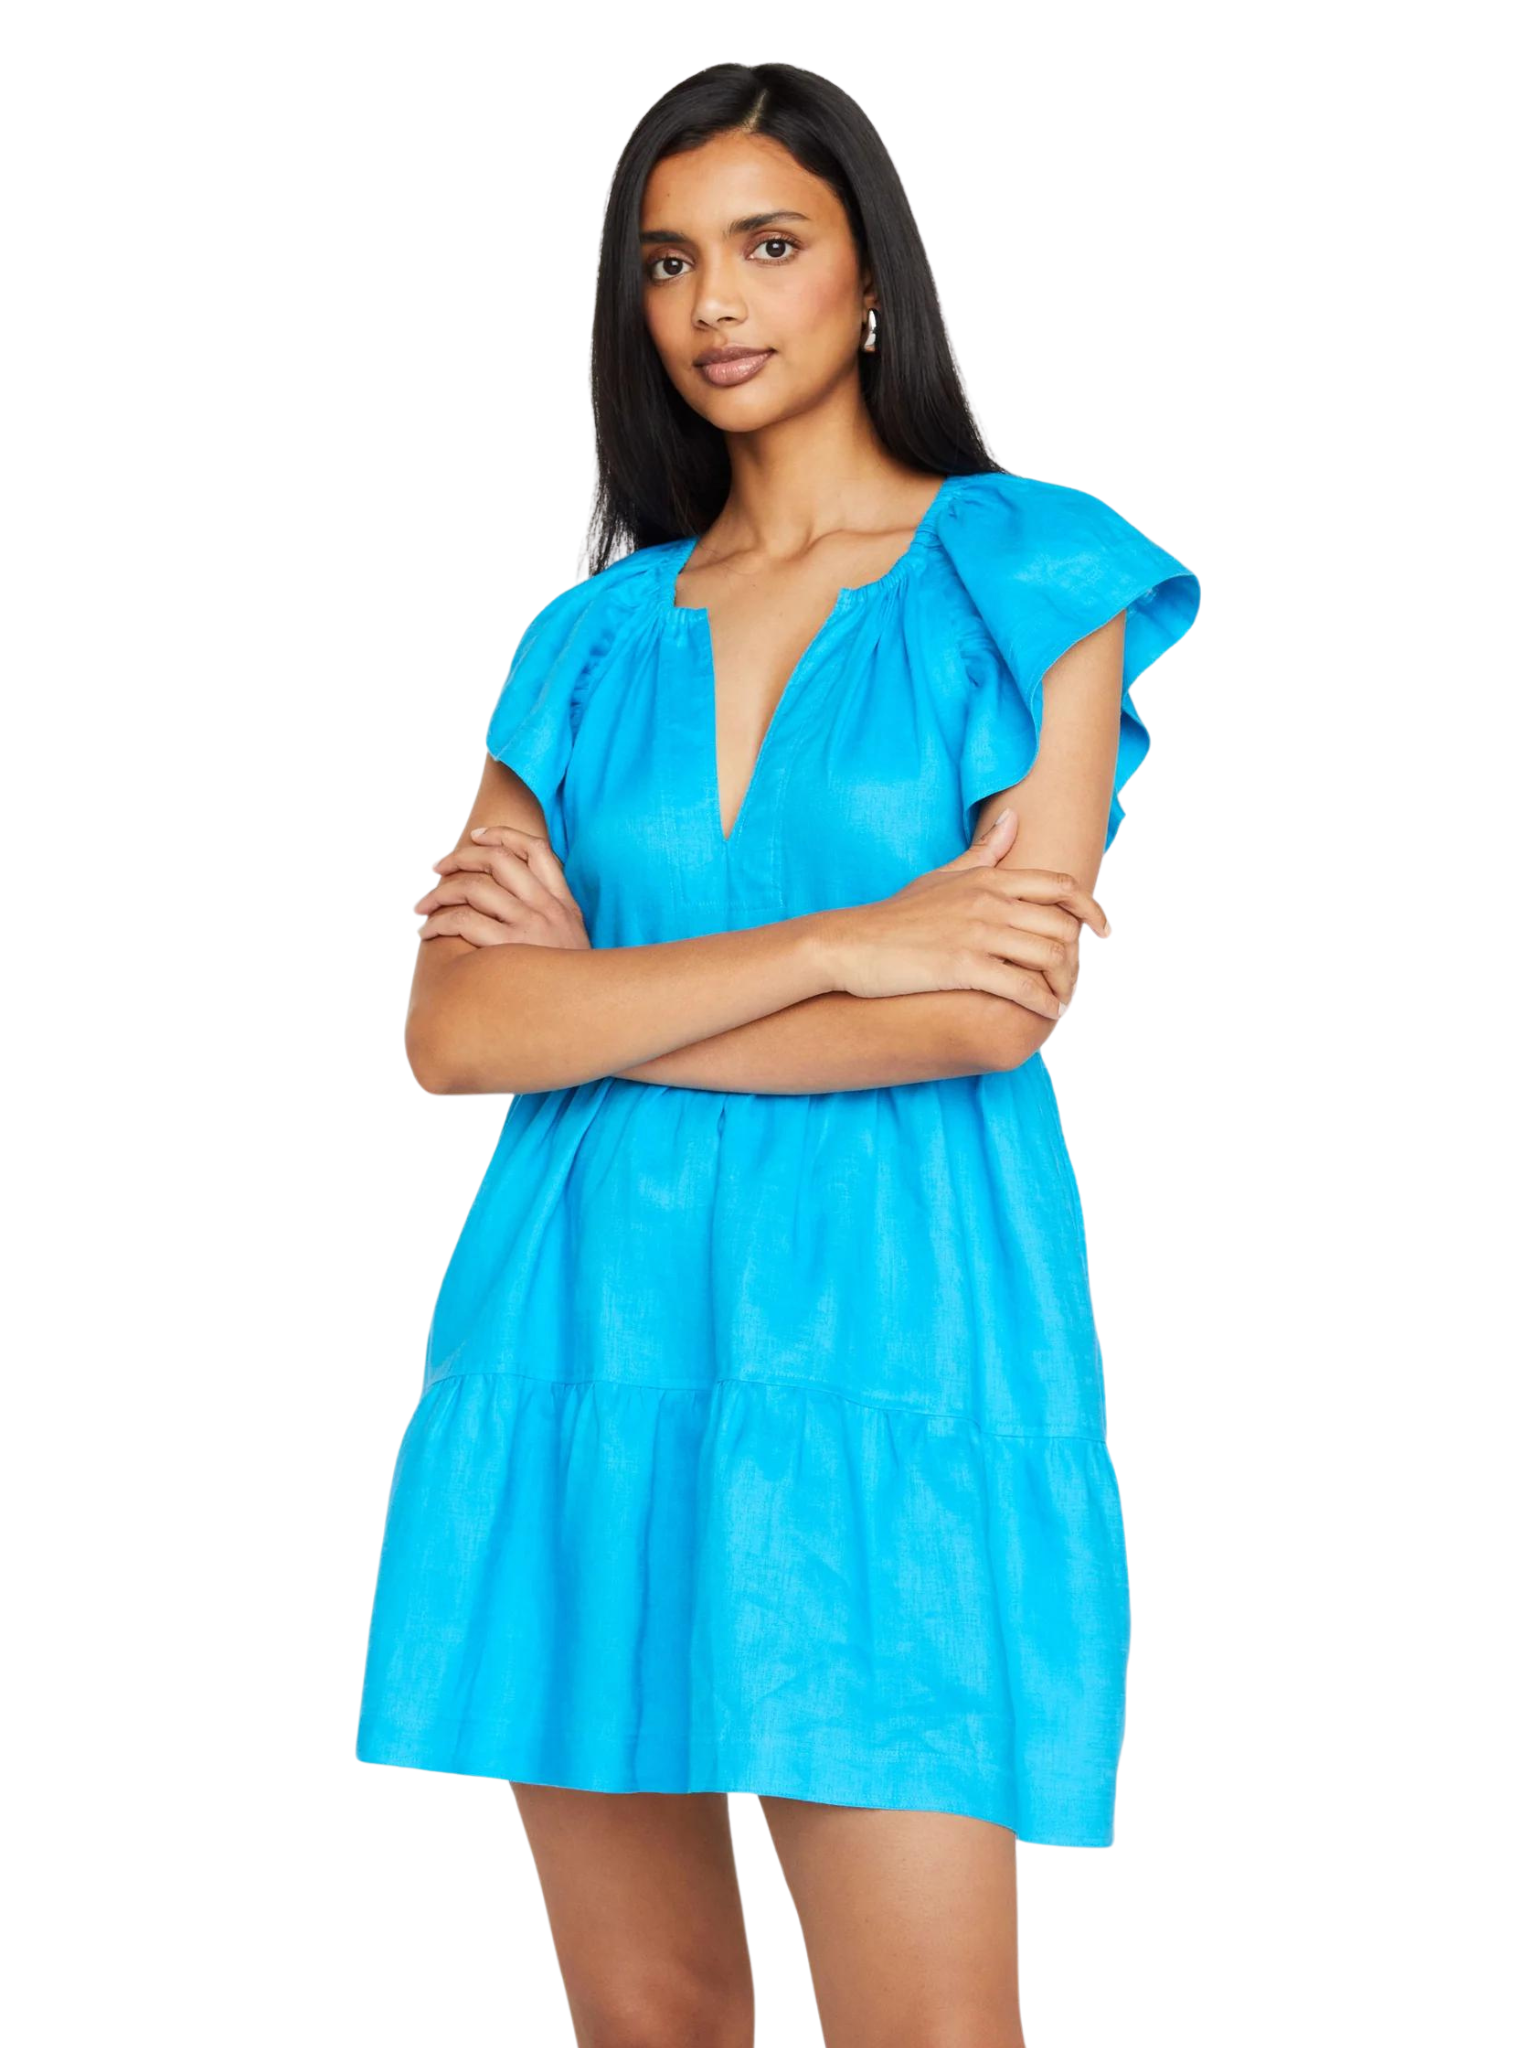 The Kara Dress by Marie Oliver offers an easy slip-on silhouette, wide flutter sleeves, and tiered skirt. The 100% linen fabric and relaxed fit provide unbeatable comfort, quality, and versatile style. Blue dress.